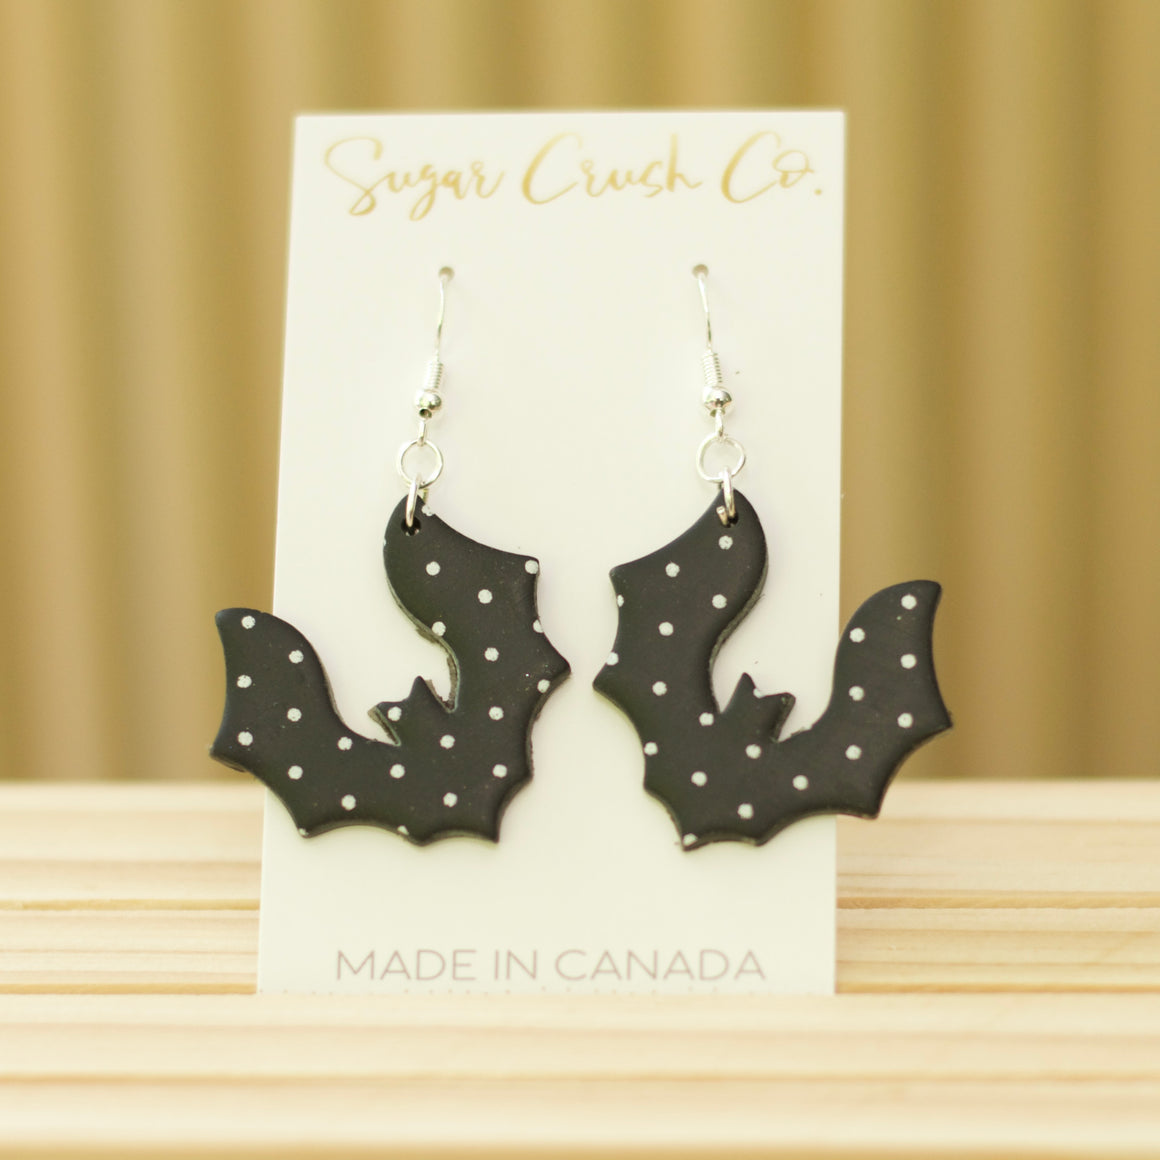 Cute black bat earrings with white polka dots, Halloween earrings handmade in Canada and available for wholesale